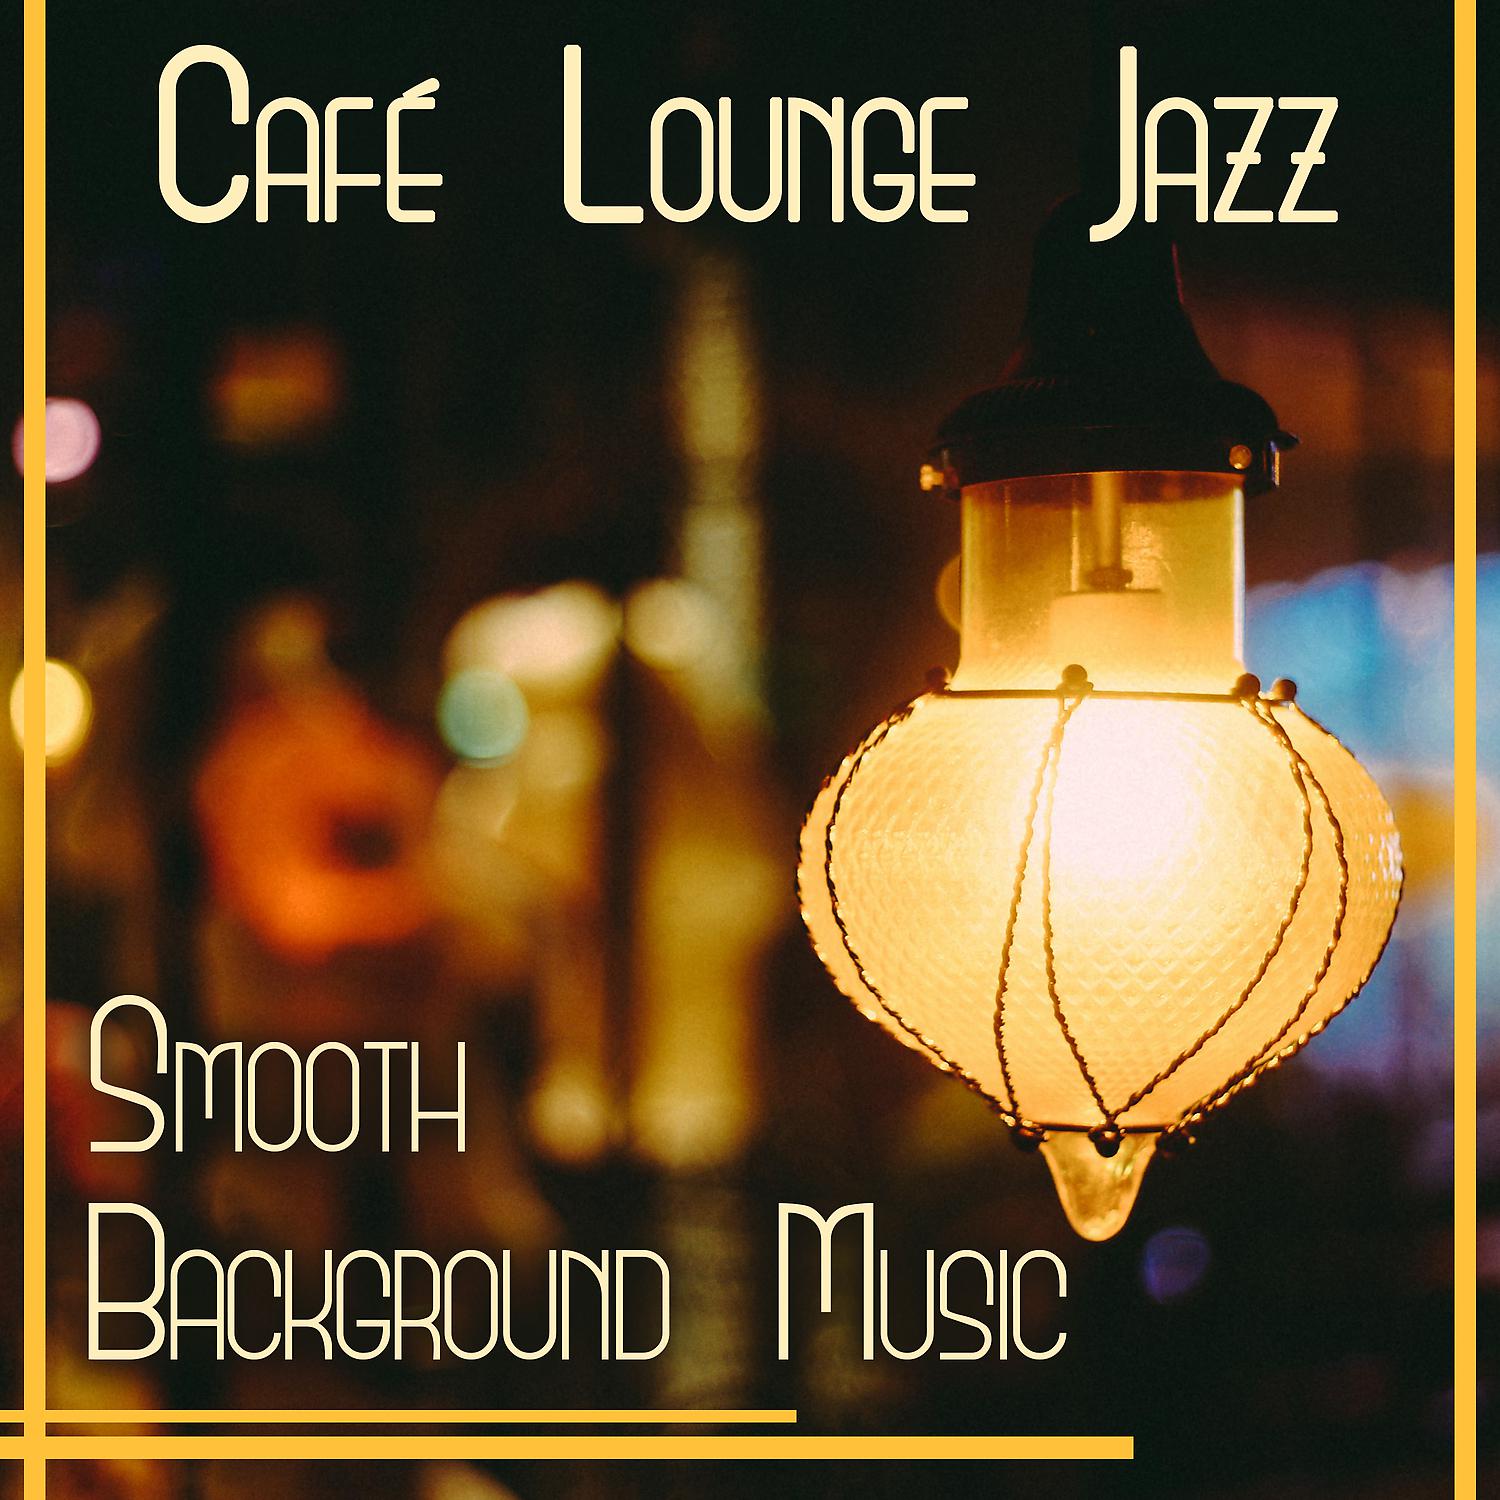 Постер альбома Café Lounge Jazz – Smooth Background Music: Piano Bar, Instrumental Cello, Drums, Piano & Bass, Good Mood & Relax